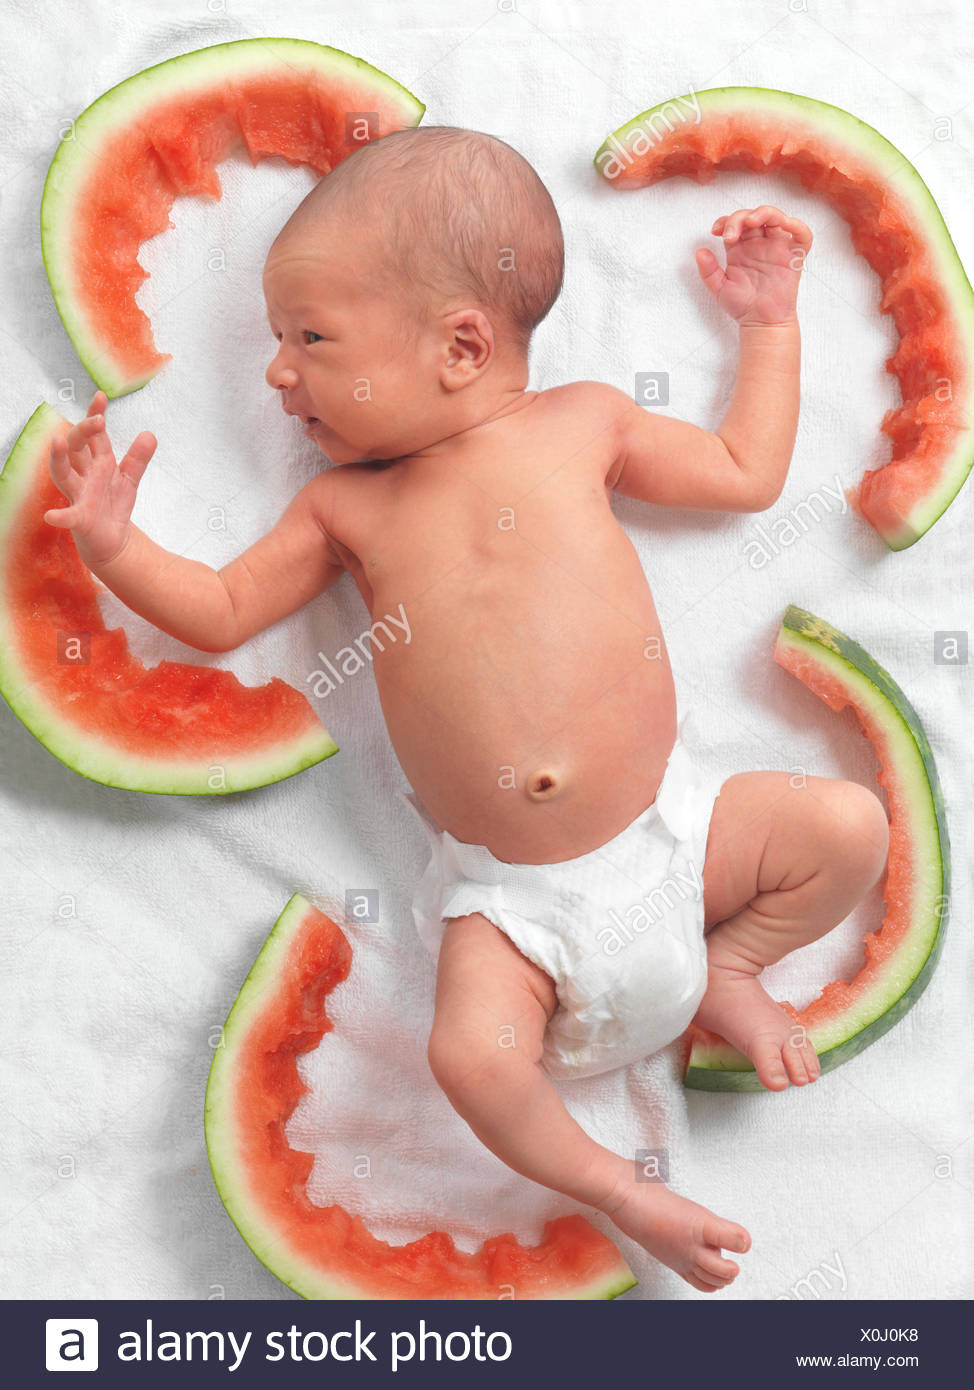 Newborn Baby In A Diaper Lying Down Amongst Watermelon Rinds Stock Photo Alamy